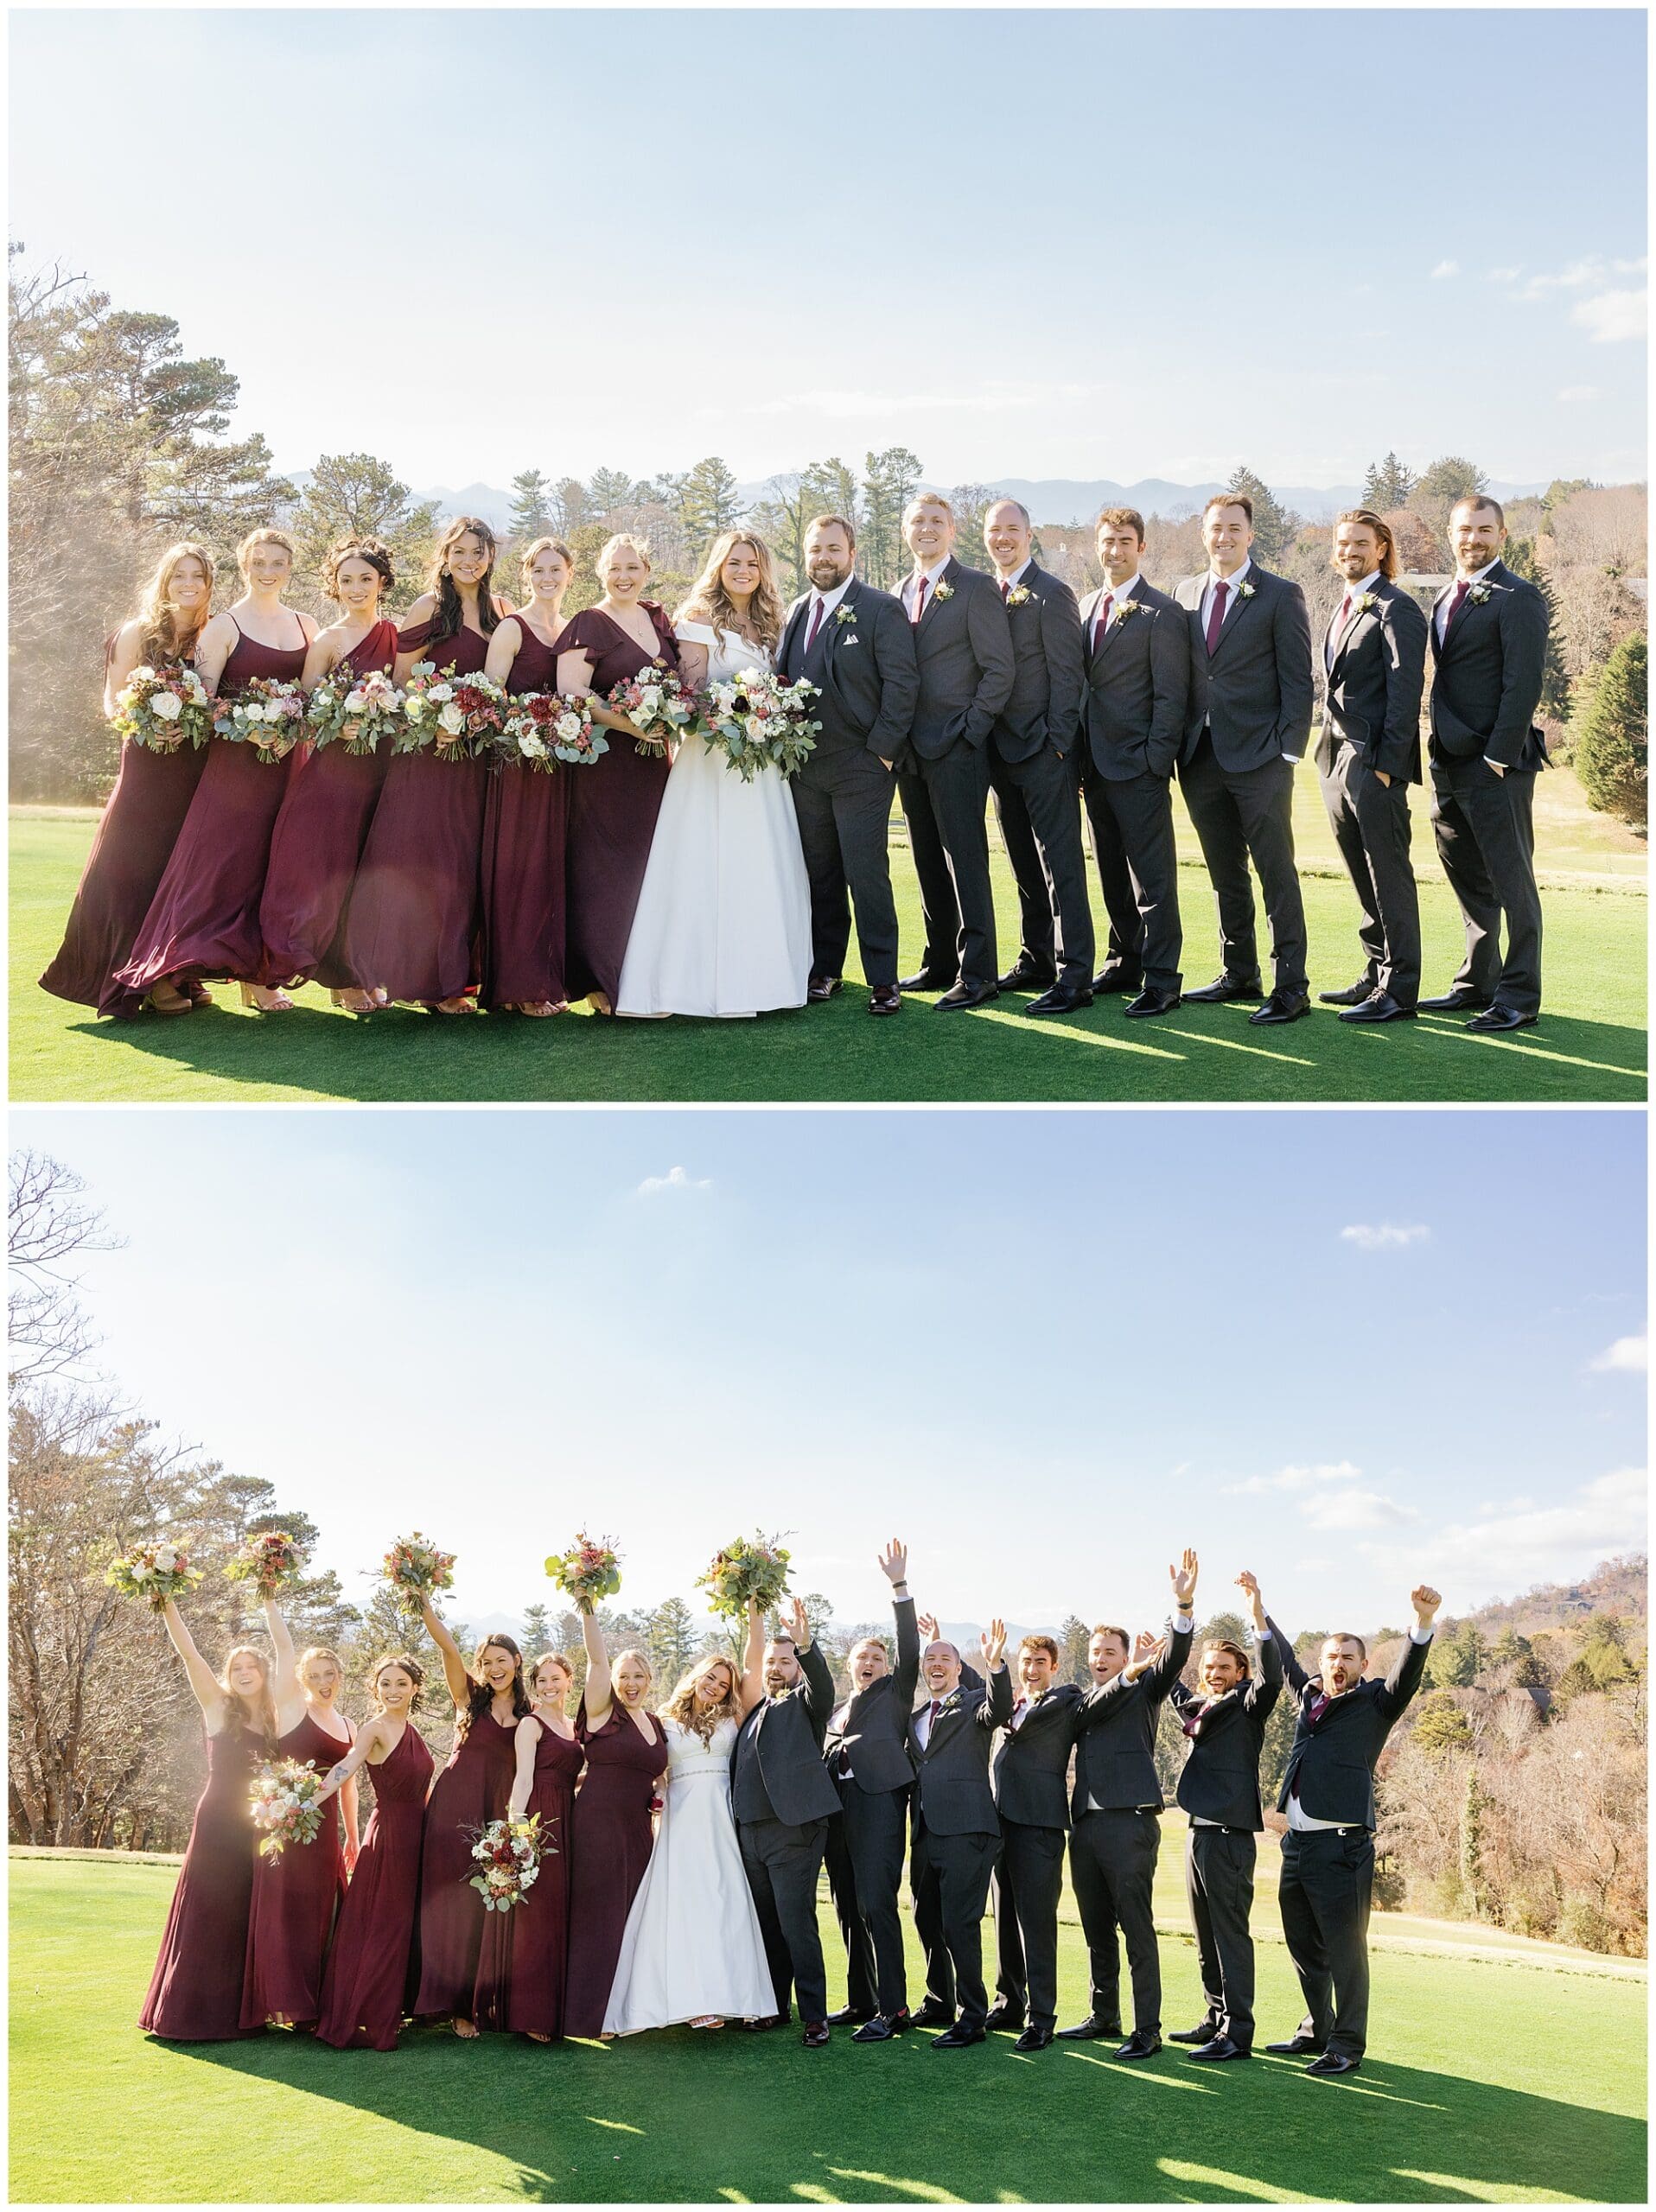 A group of bridesmaids and groomsmen pose for a photo on the golf course.